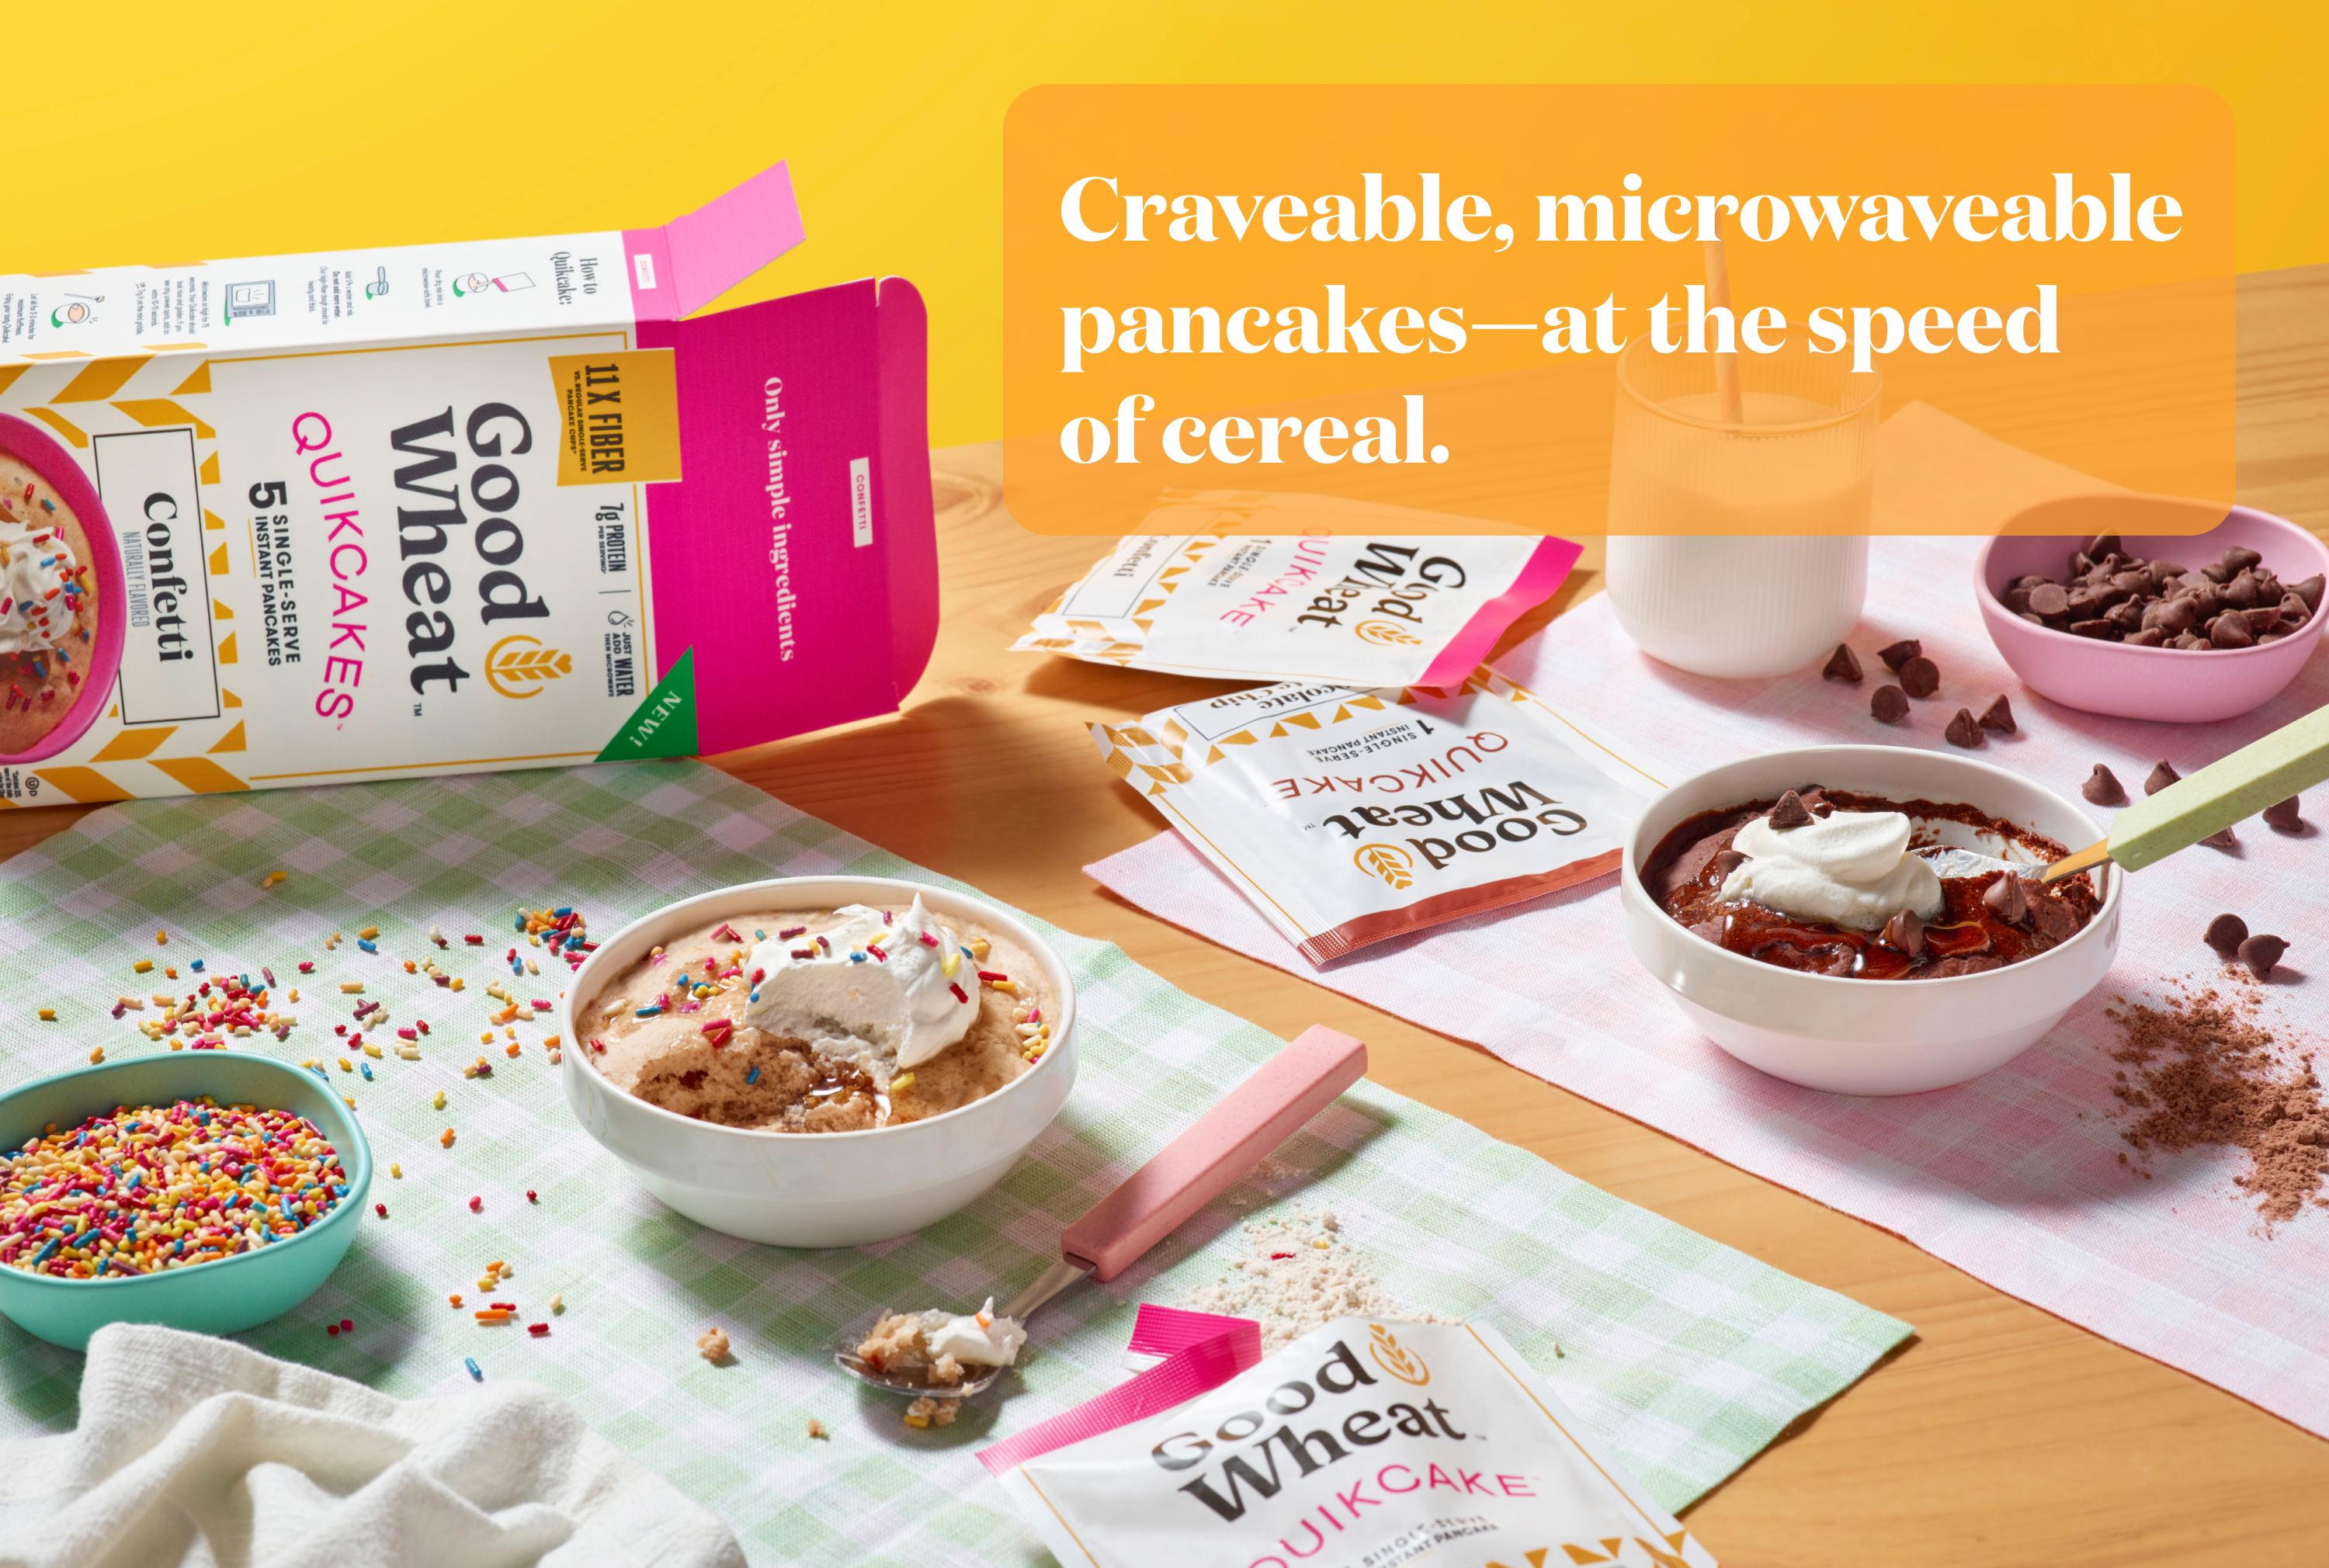 Craveable, microwaveable pancakes -- at the speed of cereal.